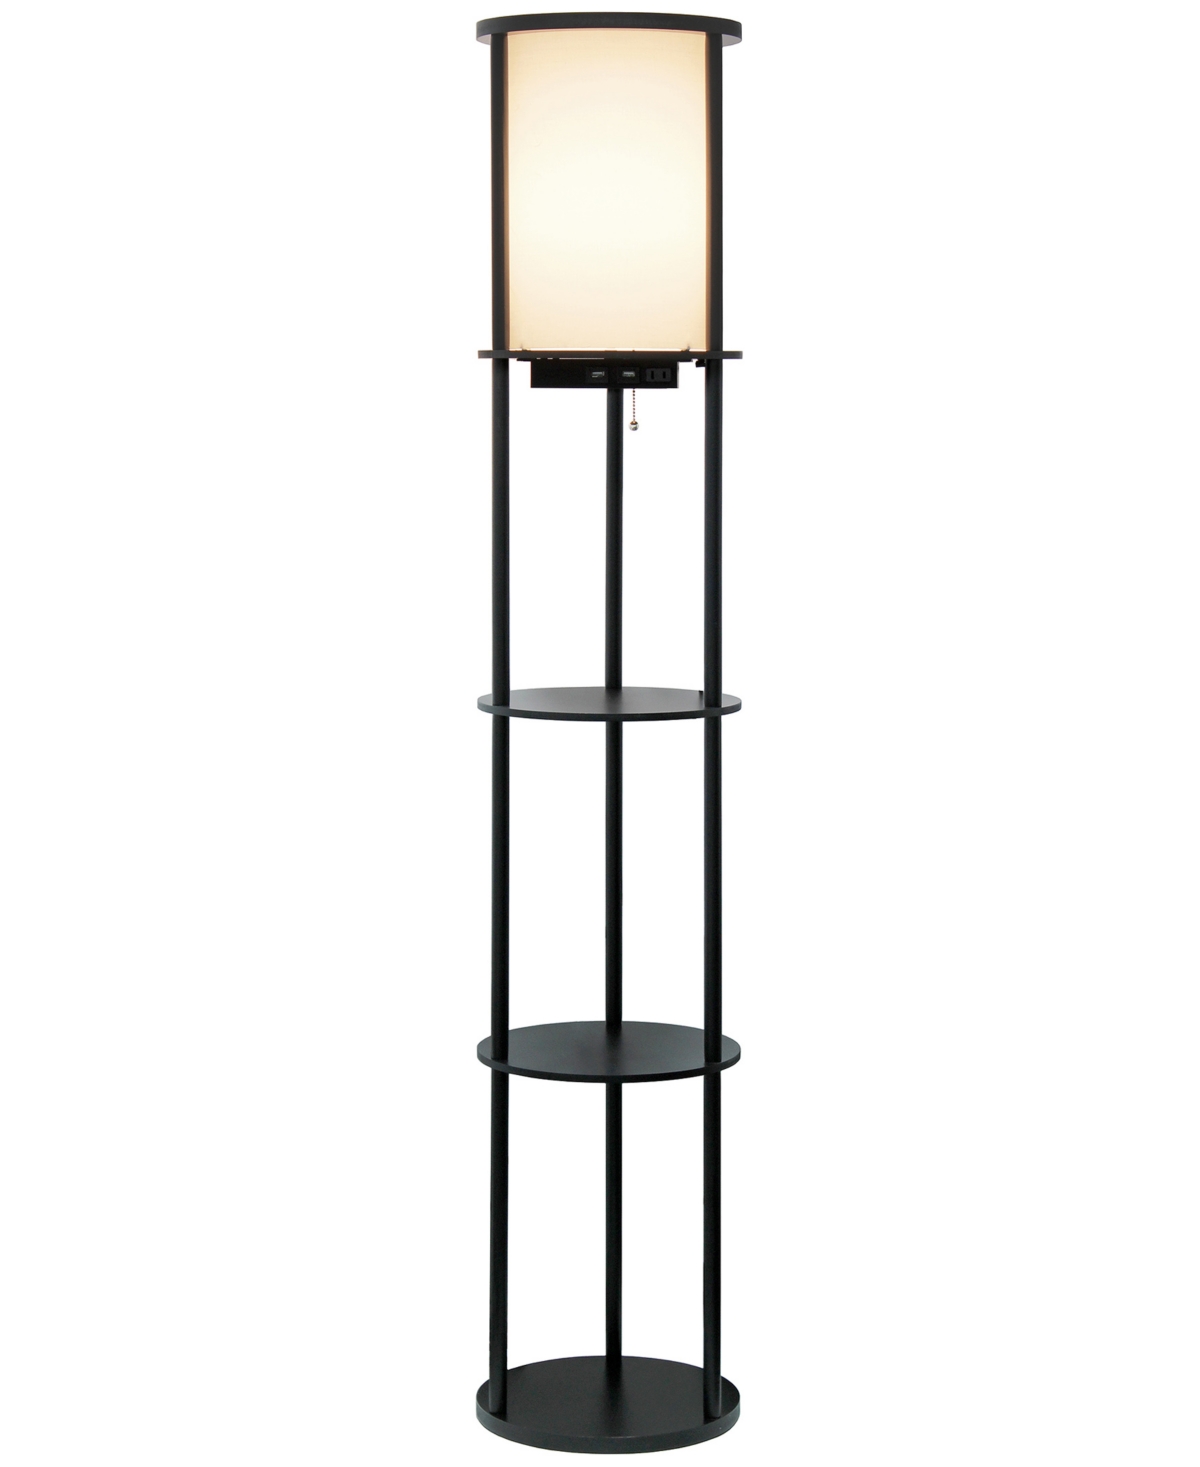 All The Rages Etagere Organizer Storage Floor Lamp With 2 Usb Charging Ports, 1 Charging Outlet In Black